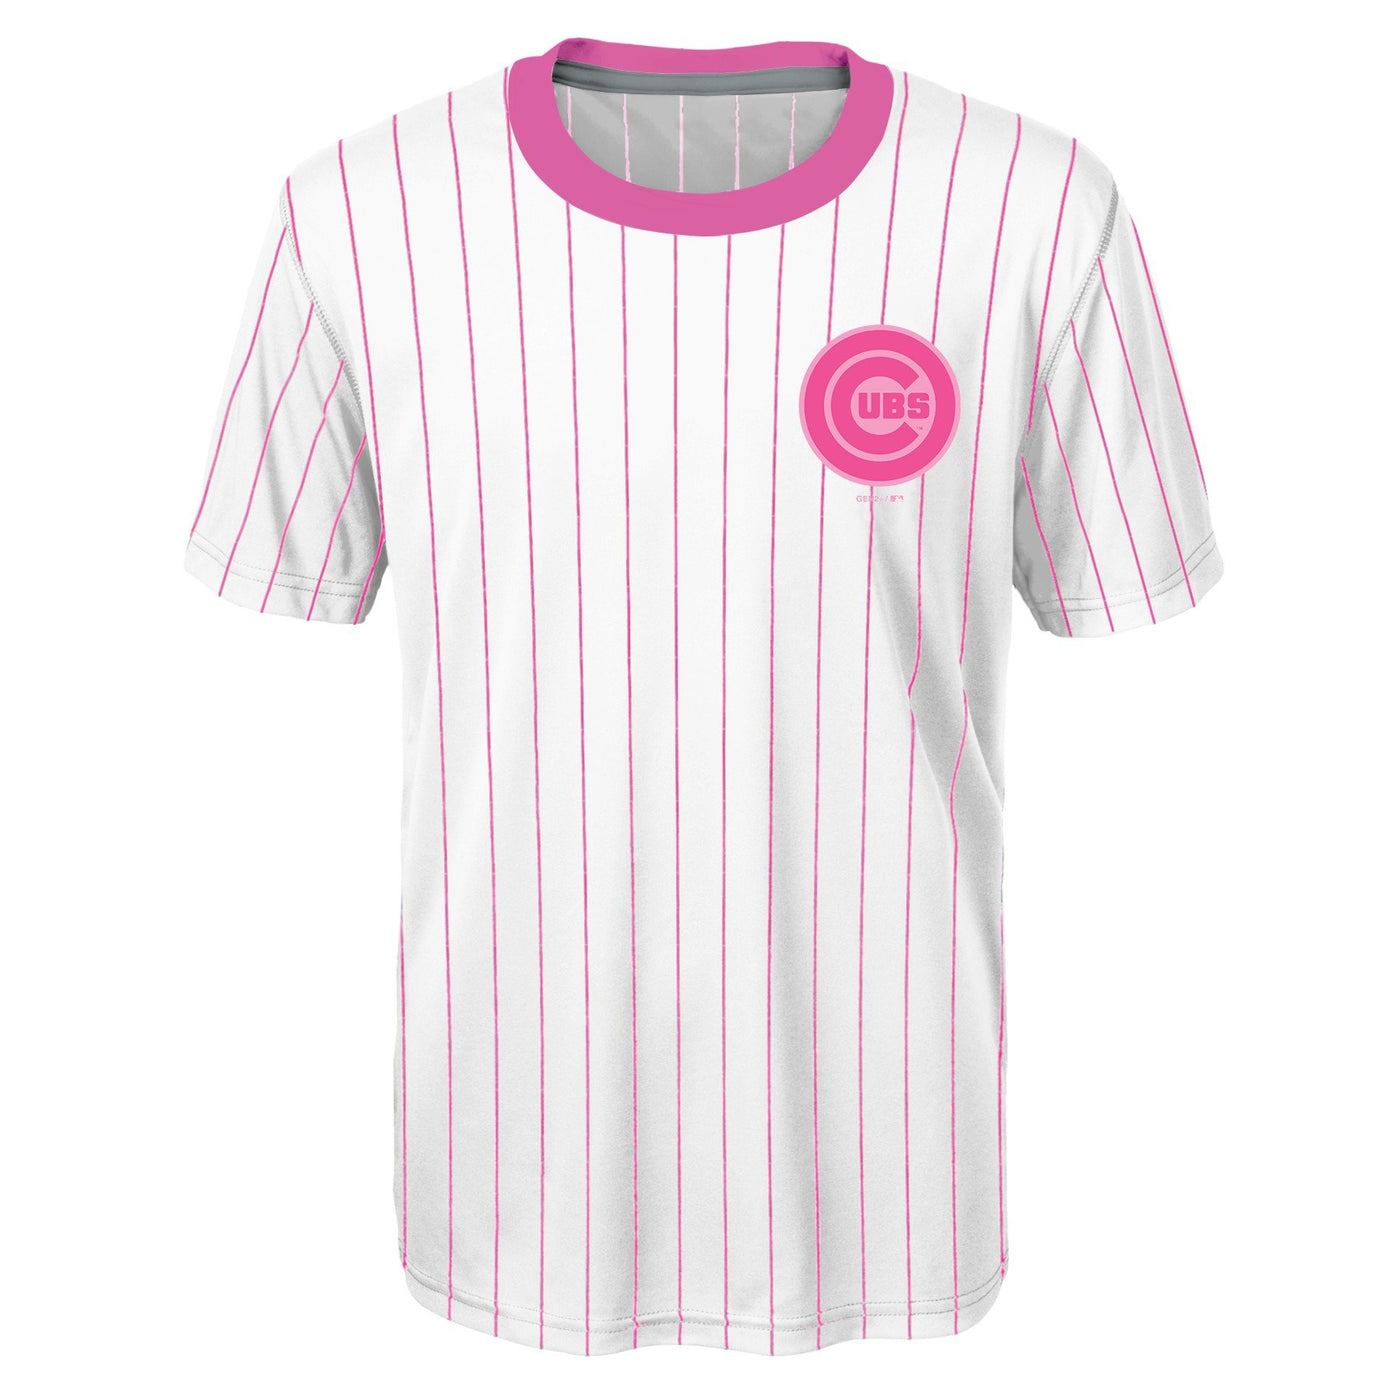 PINK PINSTRIPE YOUTH PERFORMANCE TEE - Ivy Shop